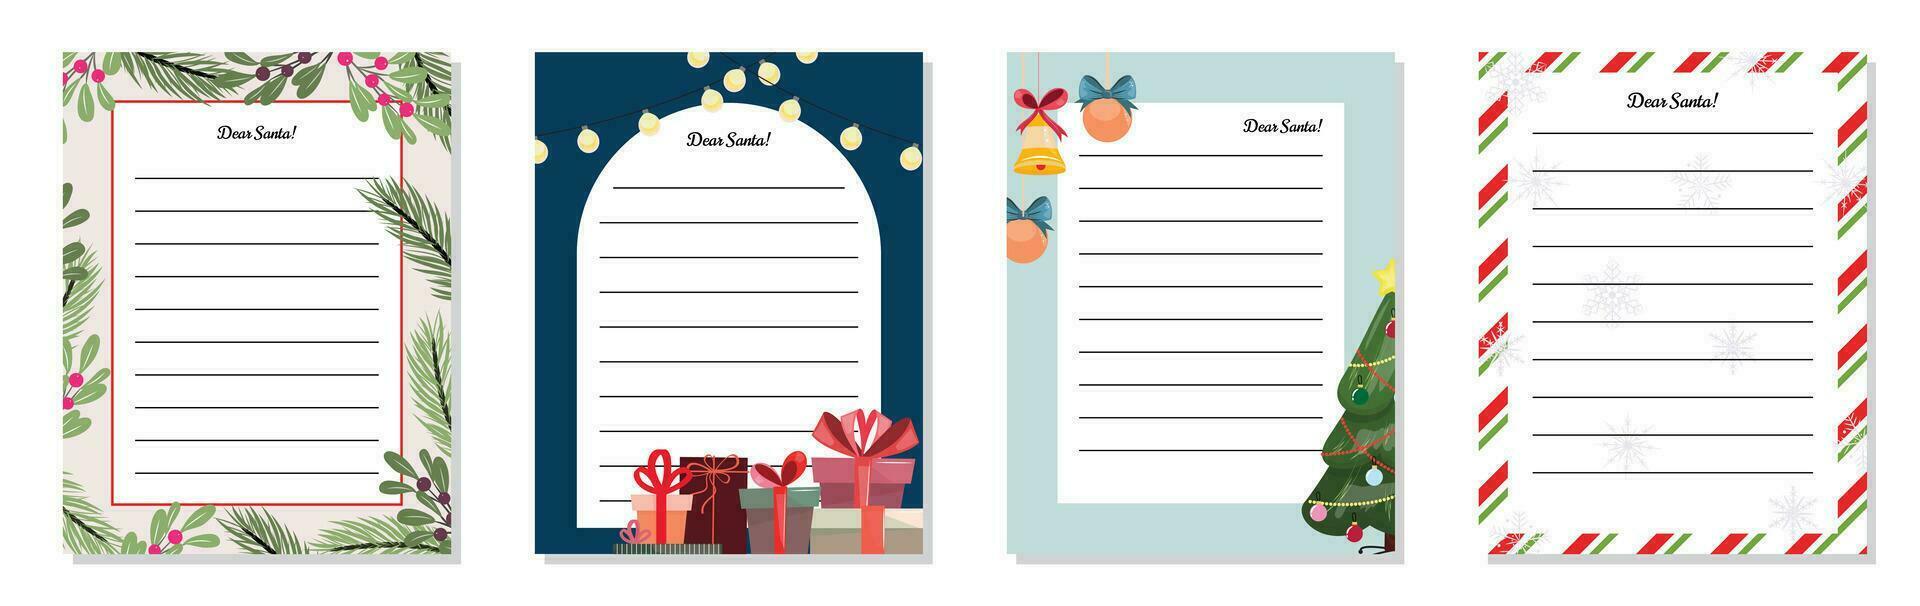 Christmas labels. Collection of templates for Christmas wish lists vector